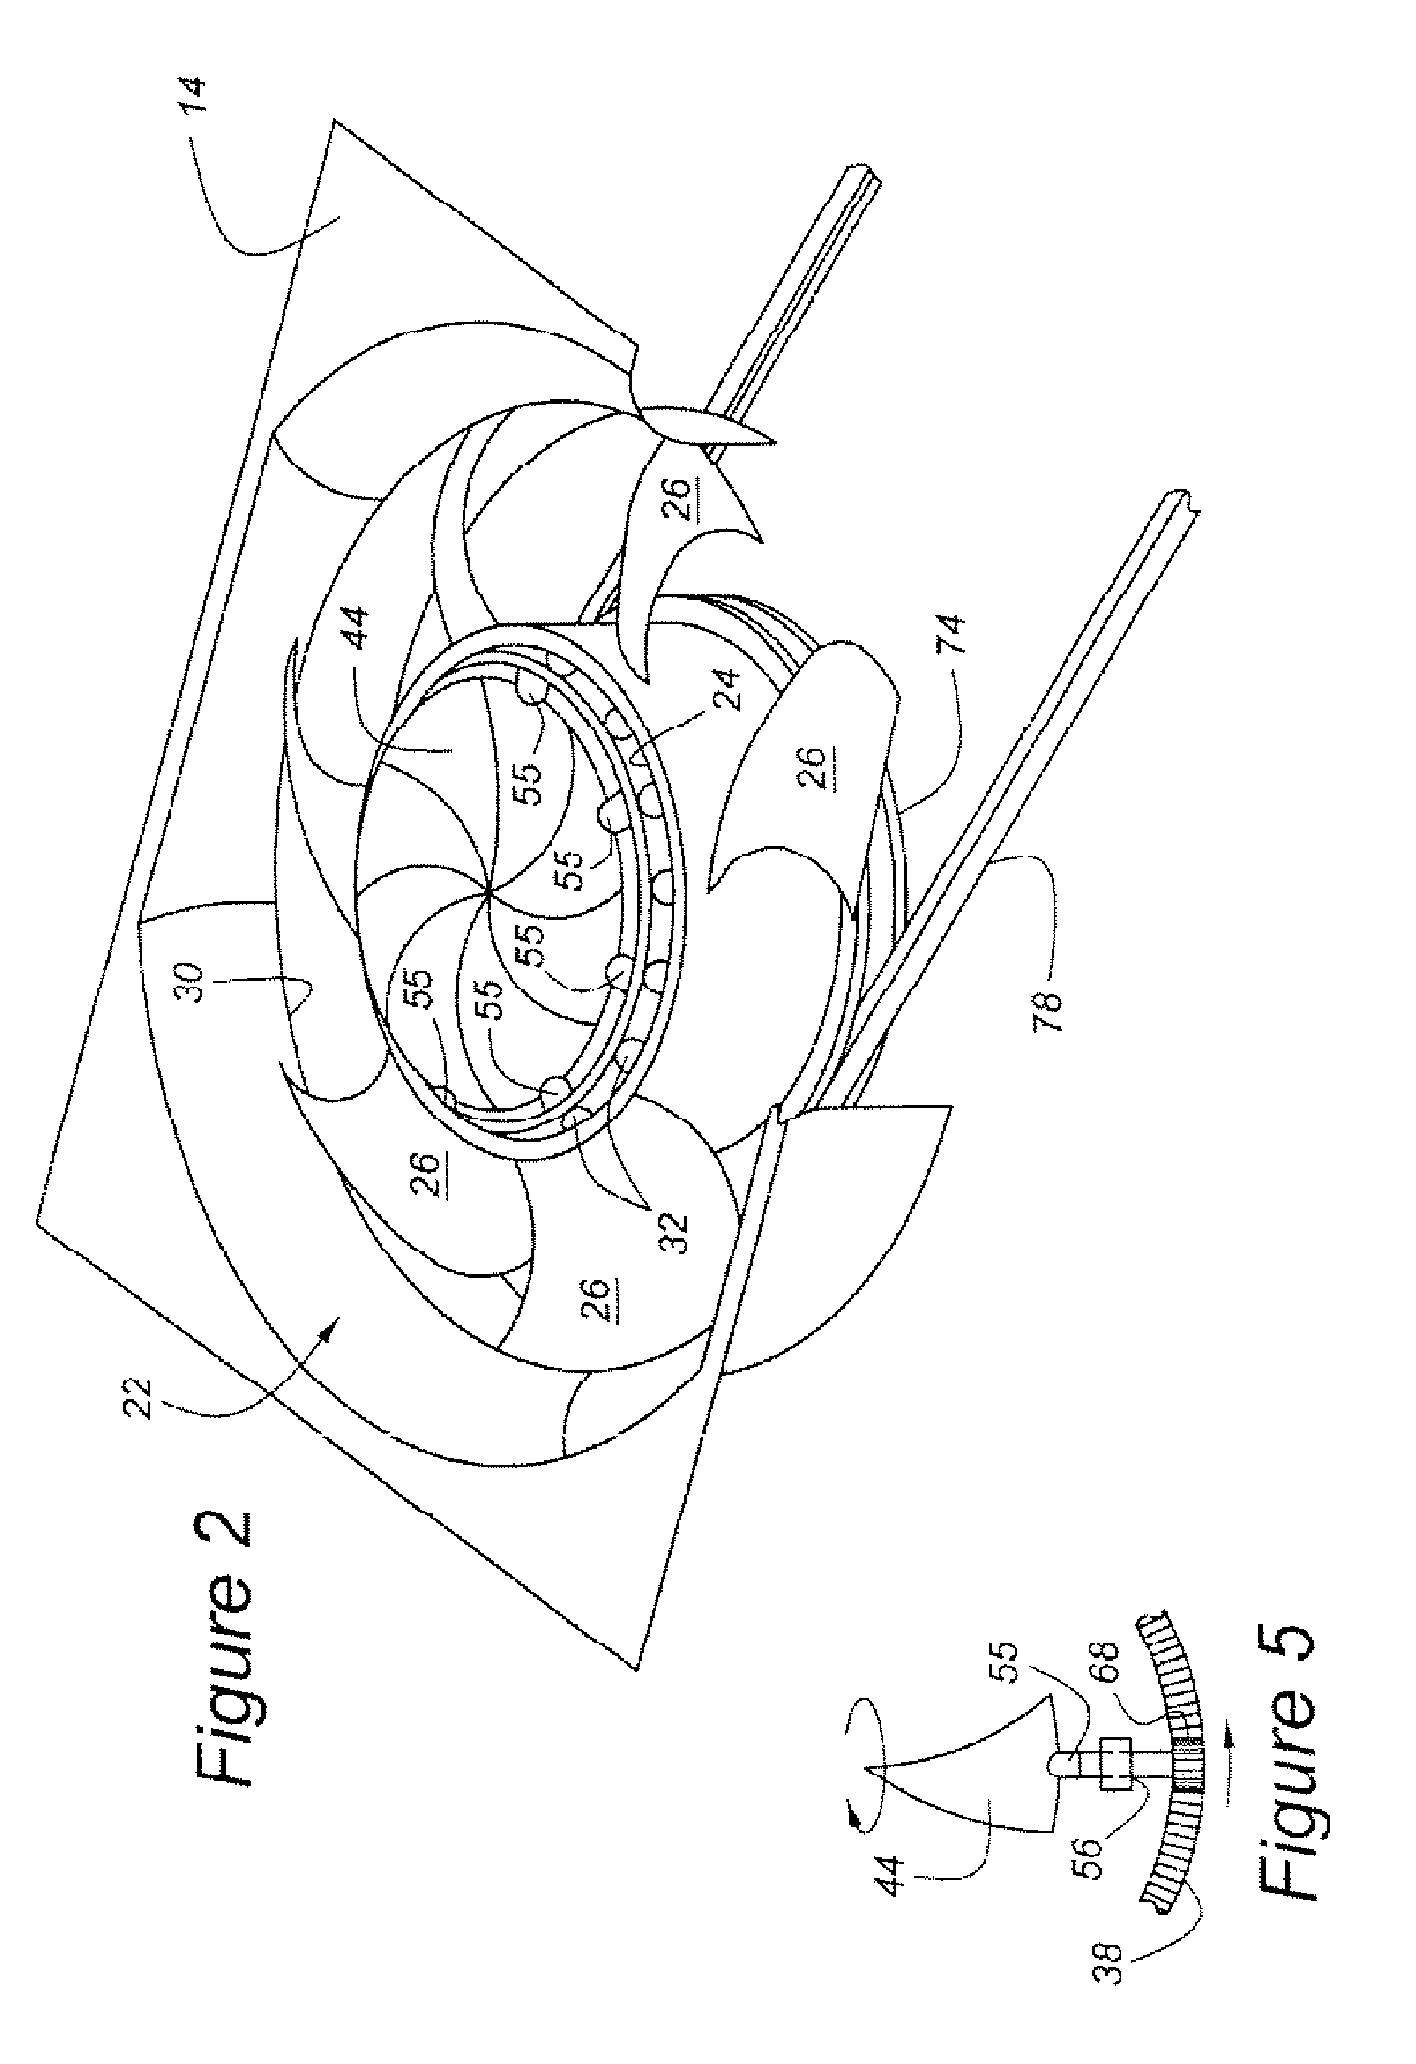 Cooling fan system for automotive vehicle